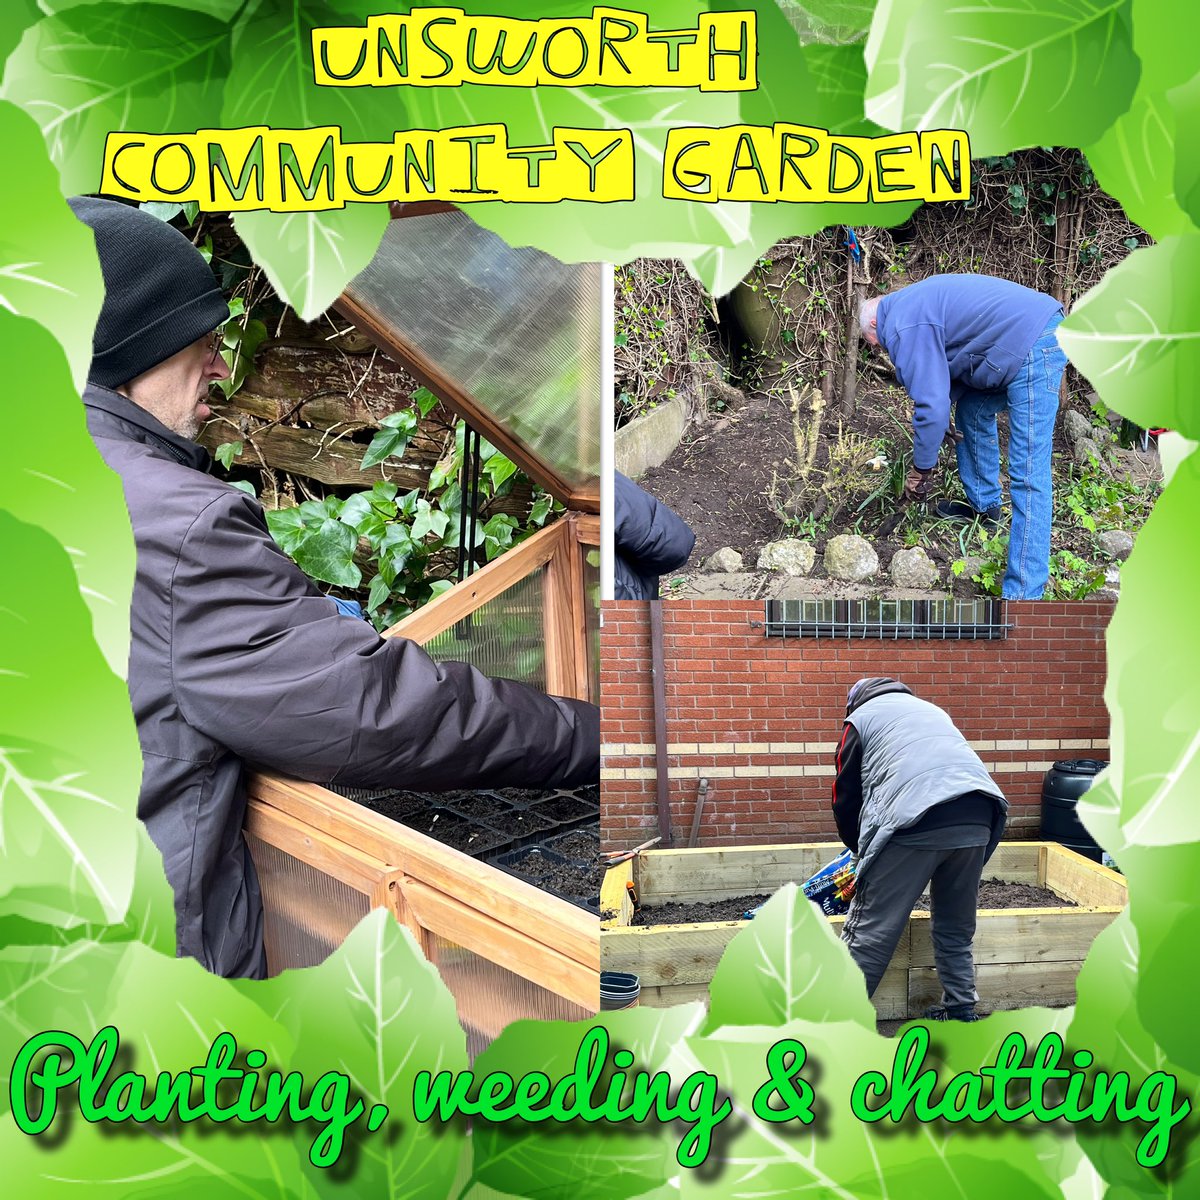 What a day! Planting, weeding and some funny conversations 😄 Unsworth Community Garden is coming on a treat! Get in touch if you would like to join us #unsworthcommunitygarden #greenprescribing @LoveUnsworth @LoveWhitefield @myplace2gr0w @Bury_Gp_Fed